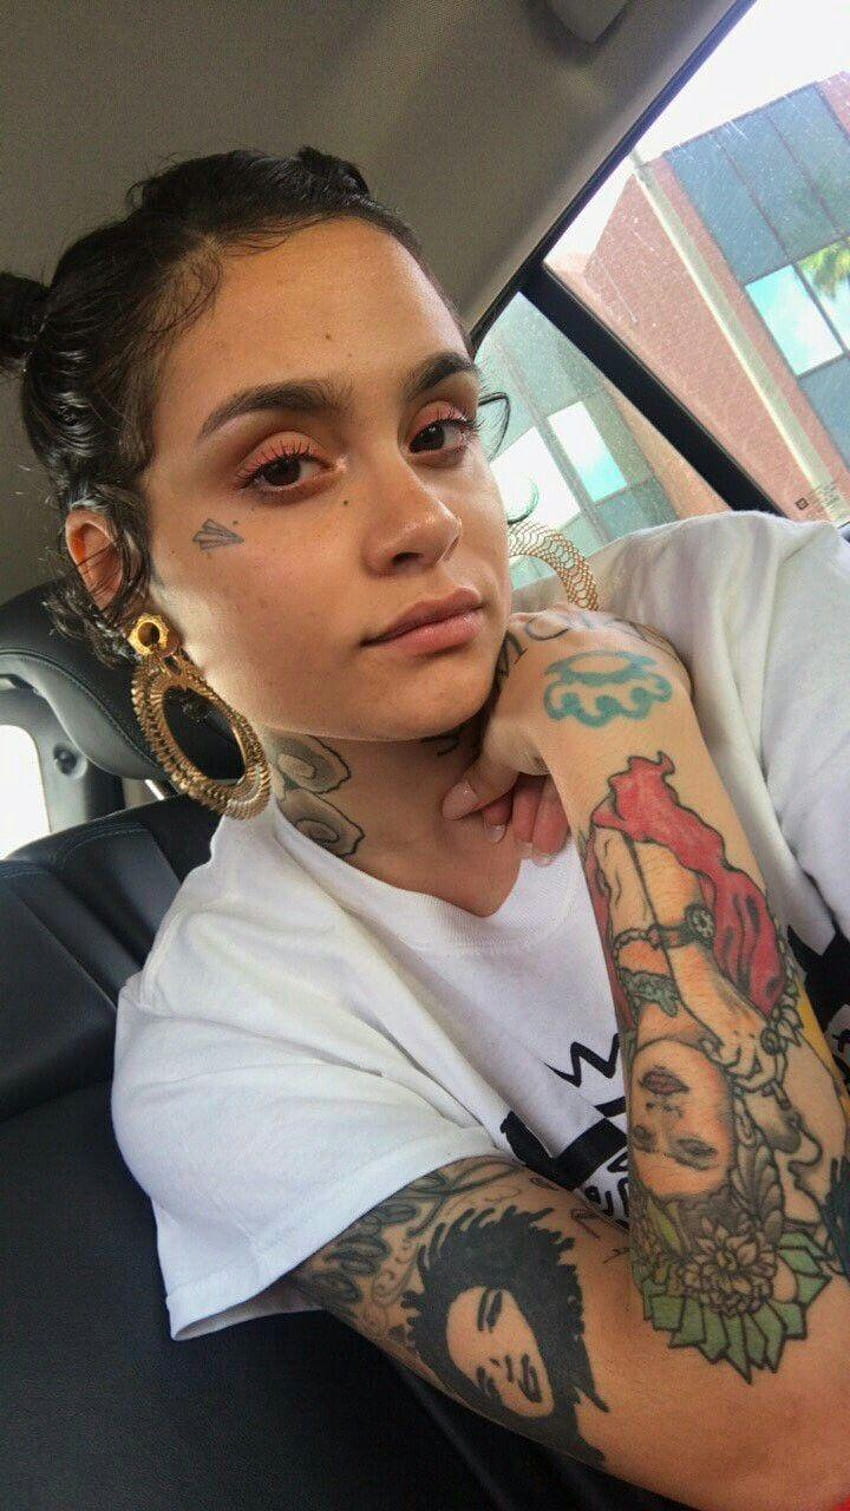 Kehlani Parrish, better known by her stage name Kehlani, is an HD phone wallpaper